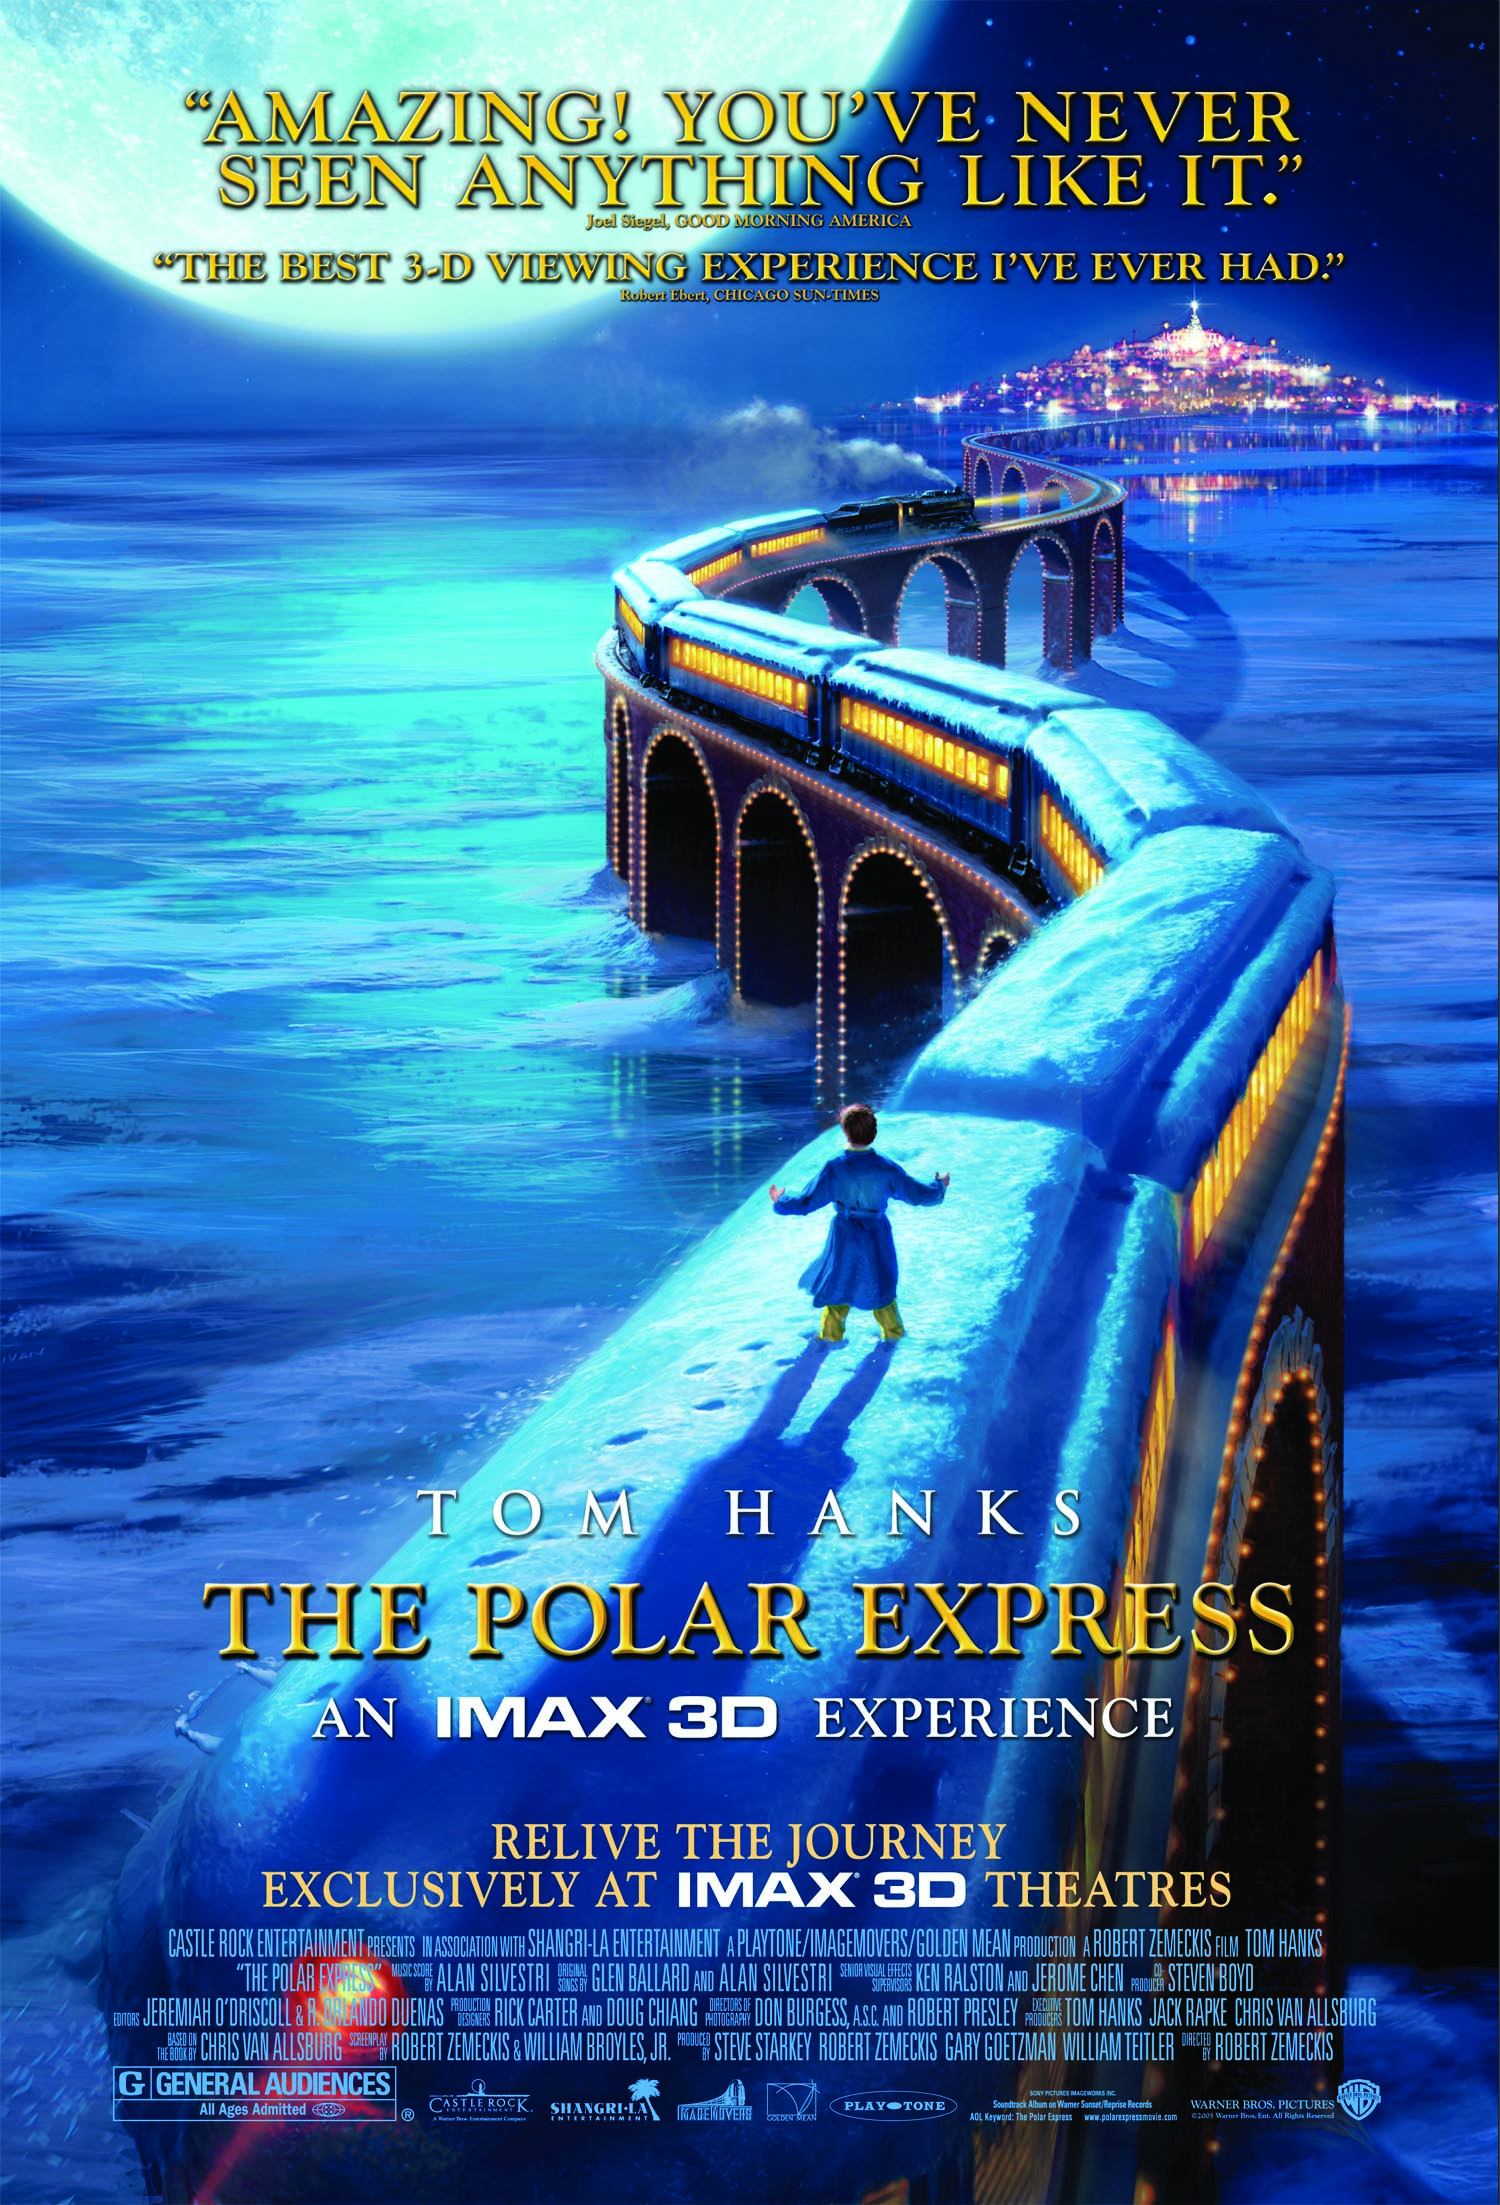 the polar express soundtrack is amazing